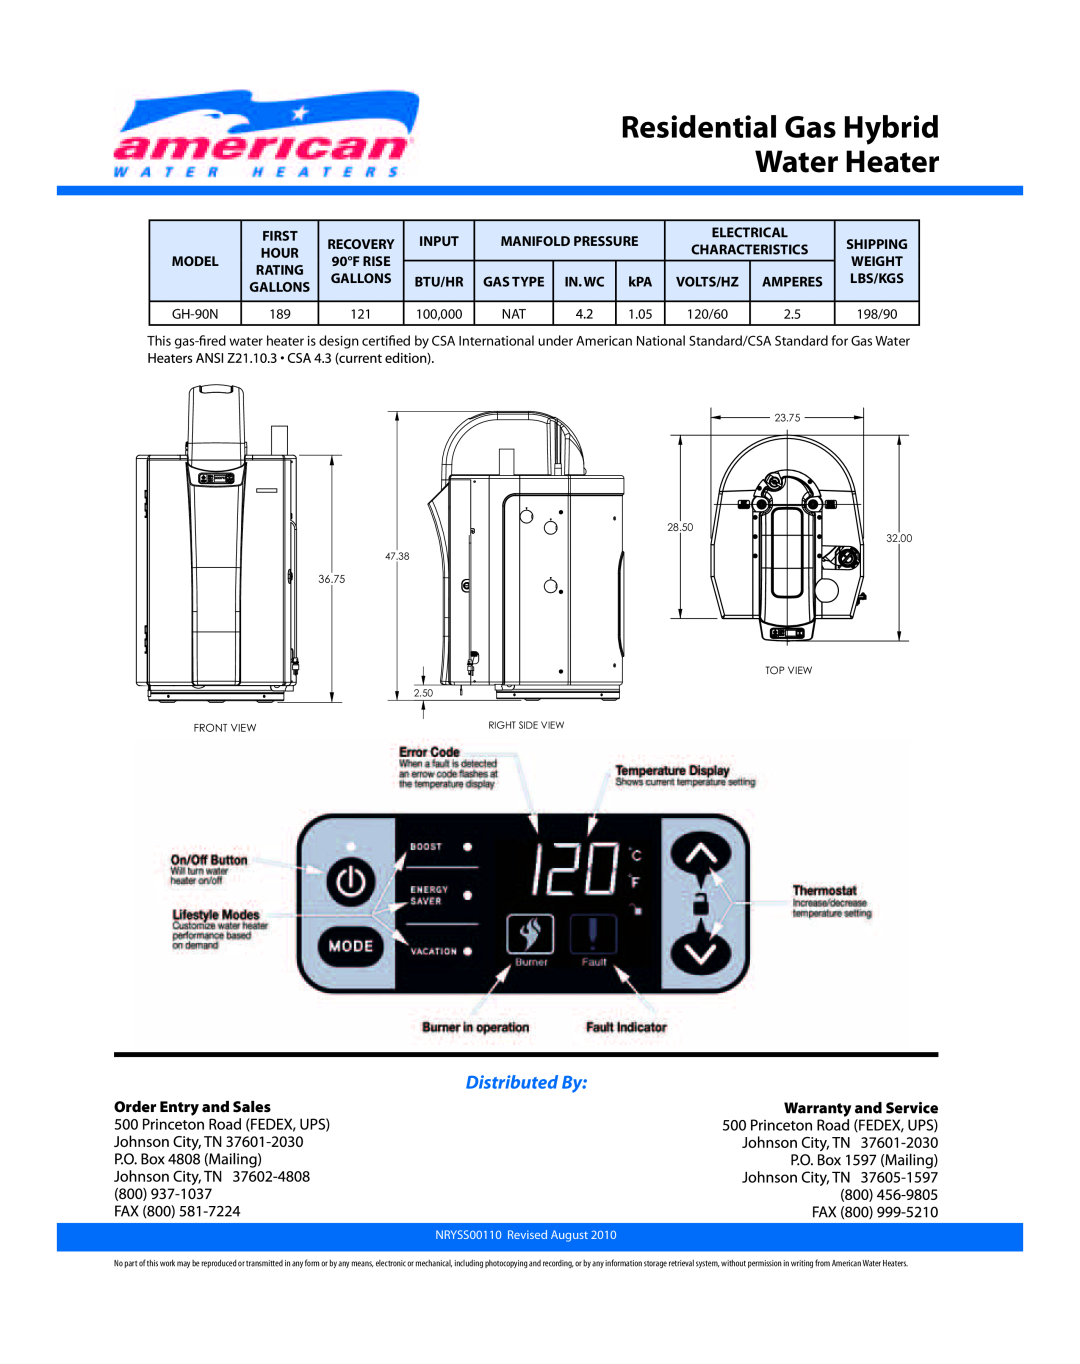 American Water Heater NRYSS00110, NRYSS0110 Order Entry and Sales, Residential Gas Hybrid Water Heater, Distributed By 